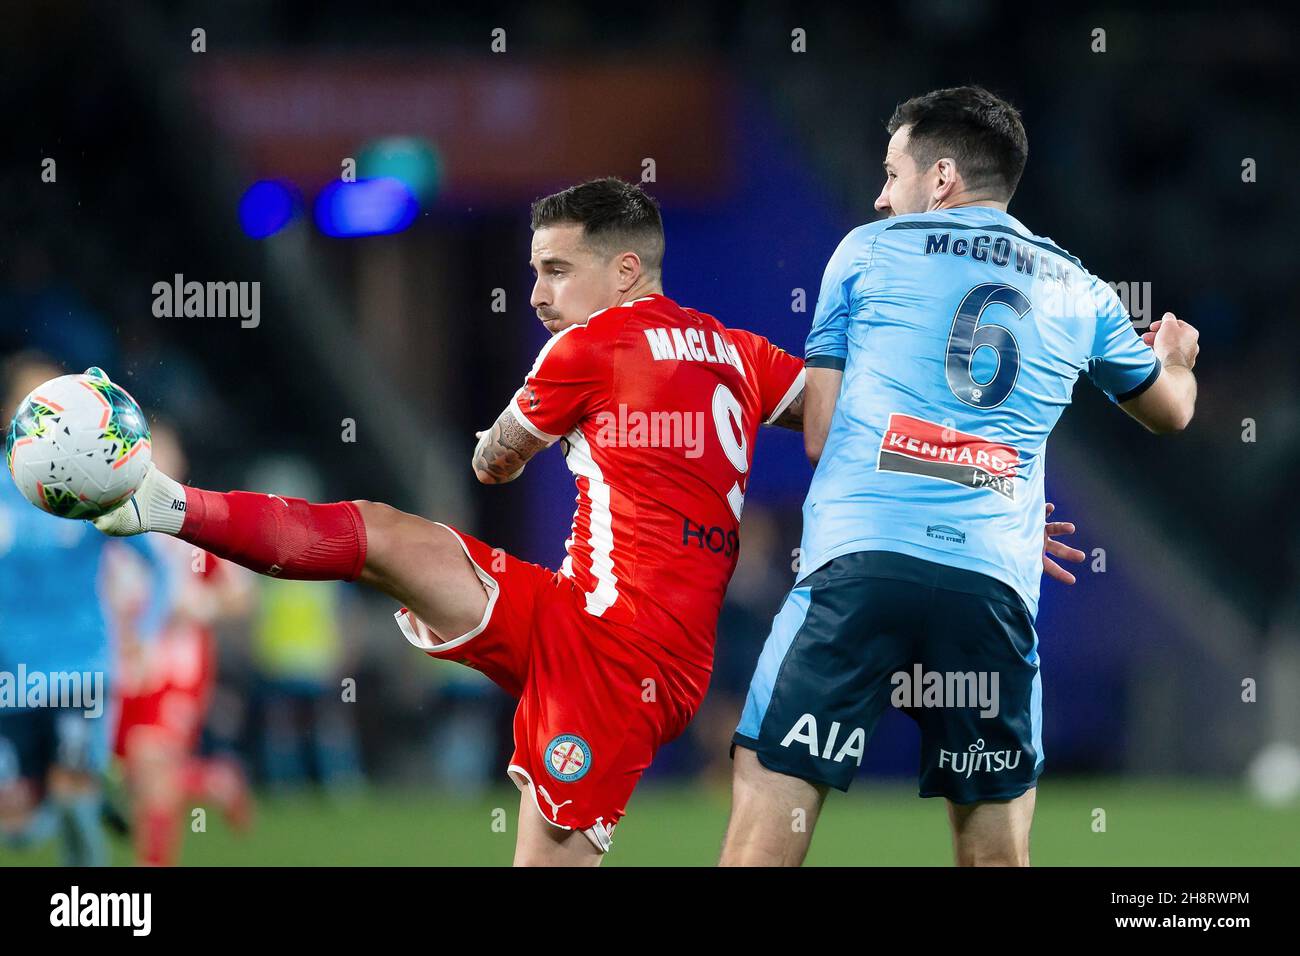 Melbourne City forward Jamie Maclaren (9) passes the ball under pressure from Sydney FC defender Ryan McGowan (6) (Photo by Damian Briggs/ Speed Media) Stock Photo